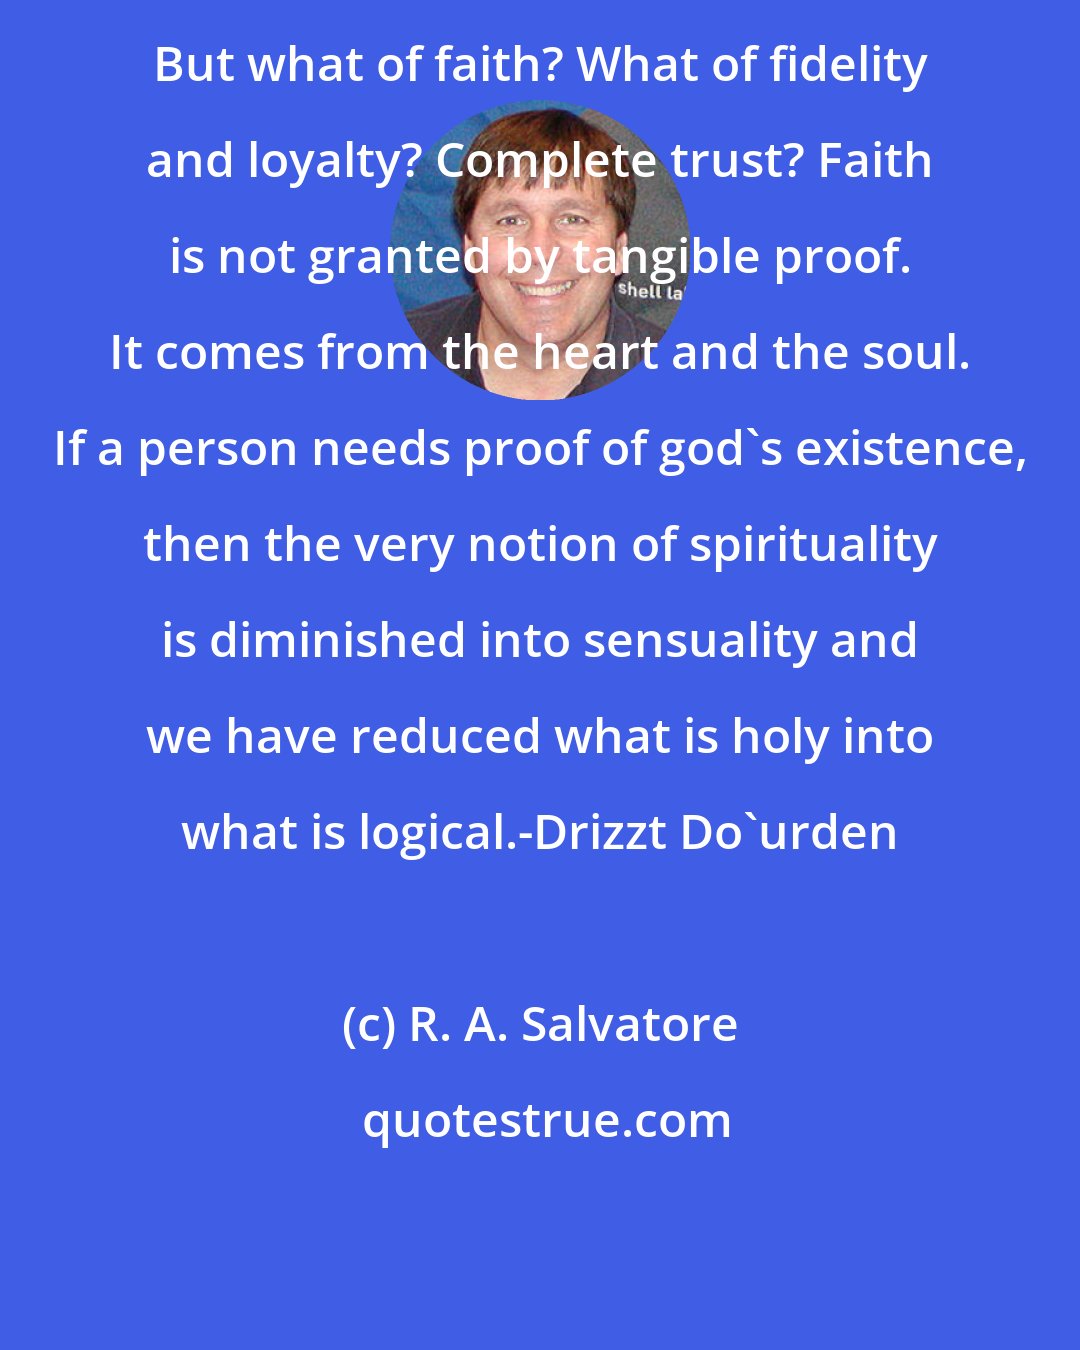 R. A. Salvatore: But what of faith? What of fidelity and loyalty? Complete trust? Faith is not granted by tangible proof. It comes from the heart and the soul. If a person needs proof of god's existence, then the very notion of spirituality is diminished into sensuality and we have reduced what is holy into what is logical.-Drizzt Do'urden